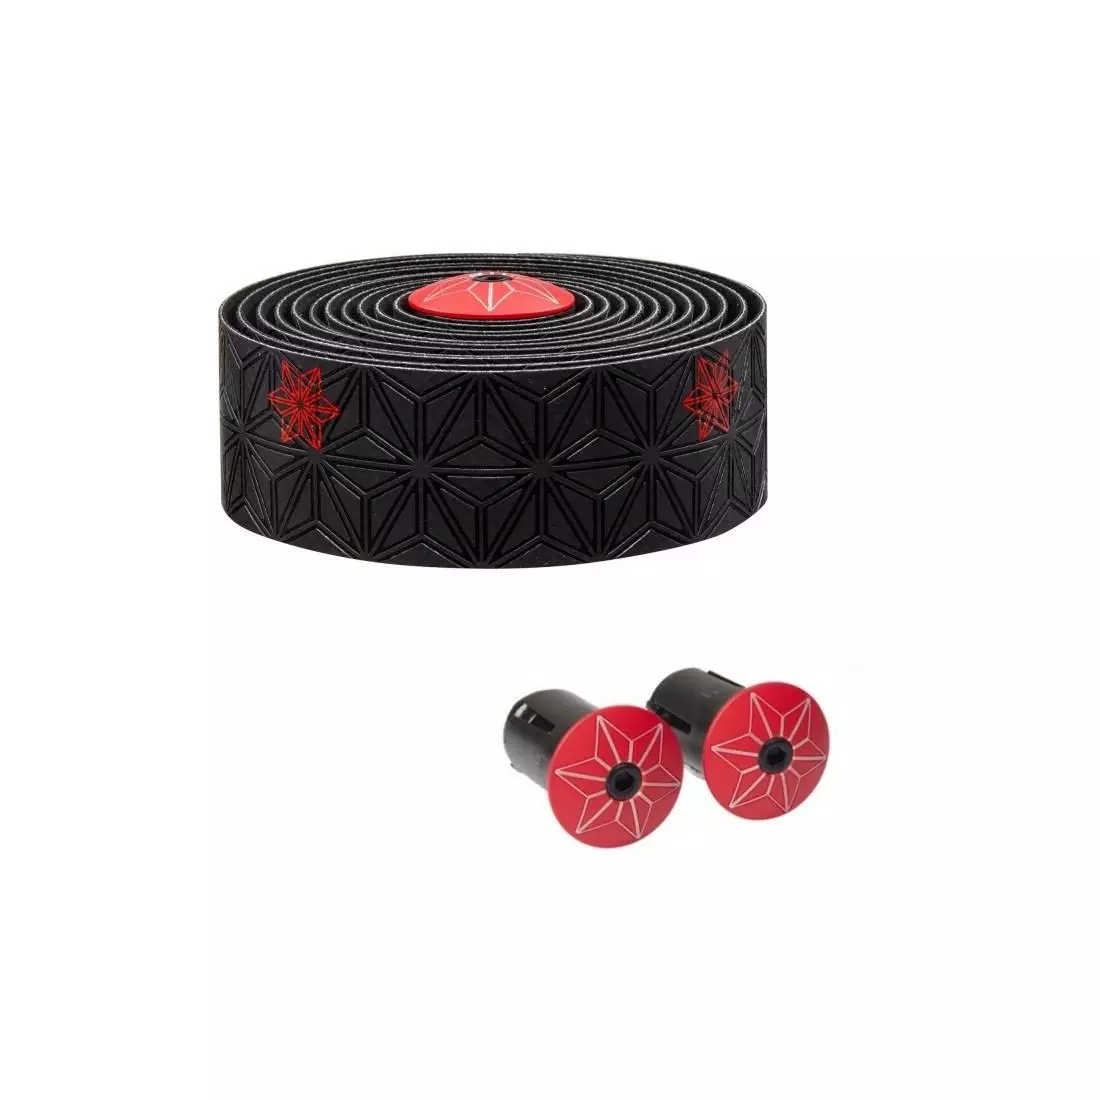 SUPACAZ BT-22 handlebar tape SUPER STICKY GALAXY black and red